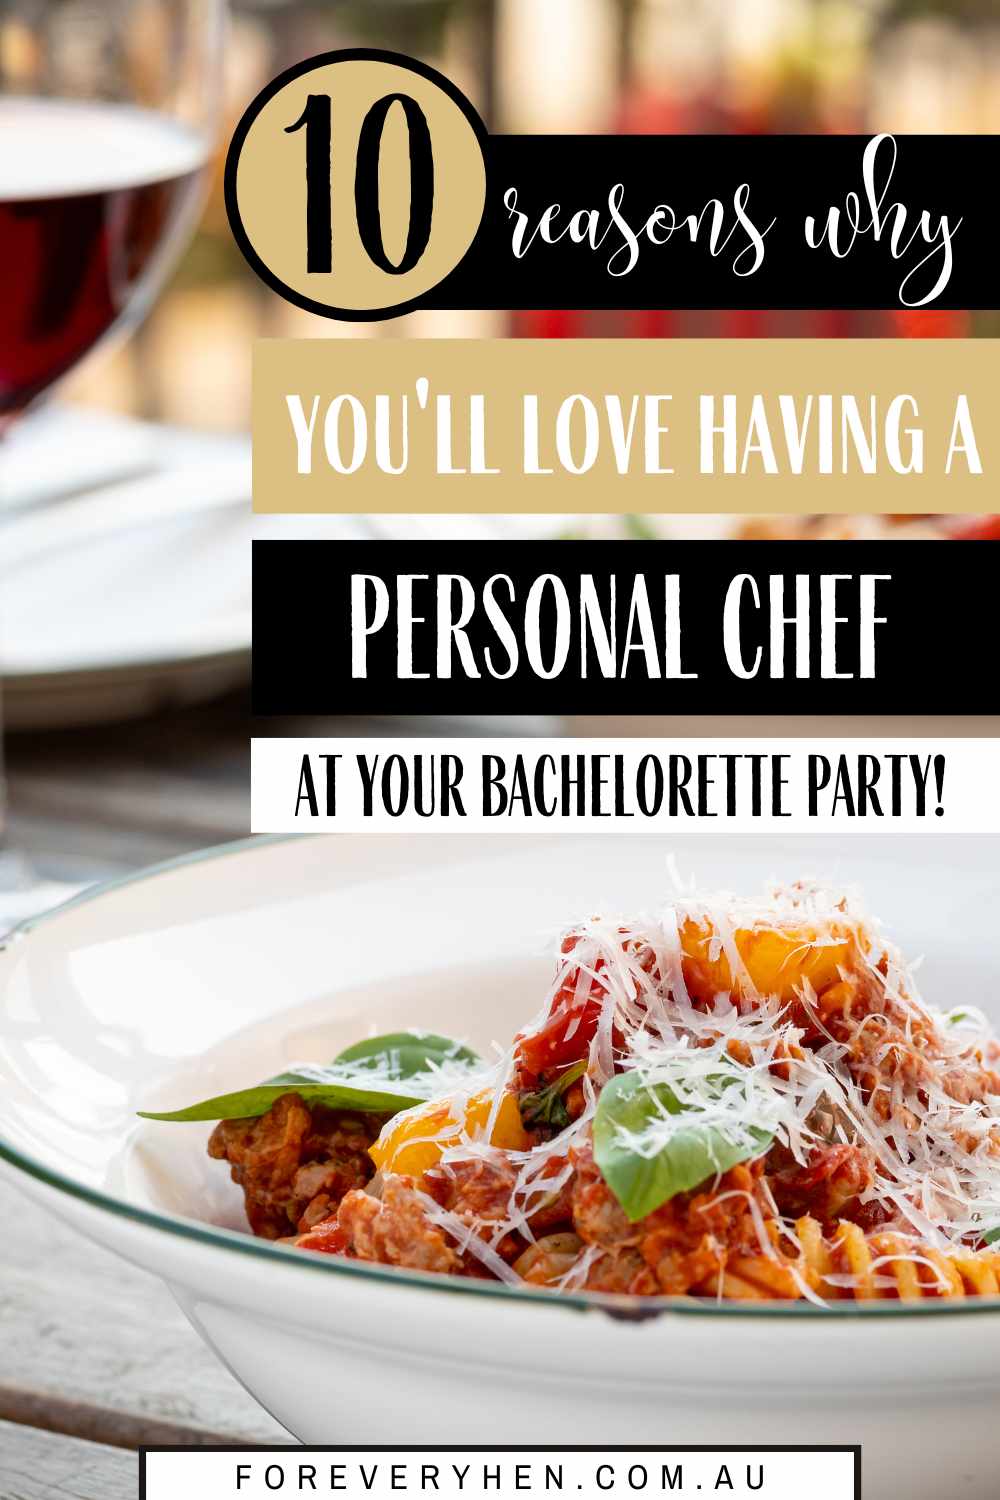 Image of gourmet pasta in a bowl. Text overlay: 10 reasons why you'll love having a personal chef at your Bachelorette party!